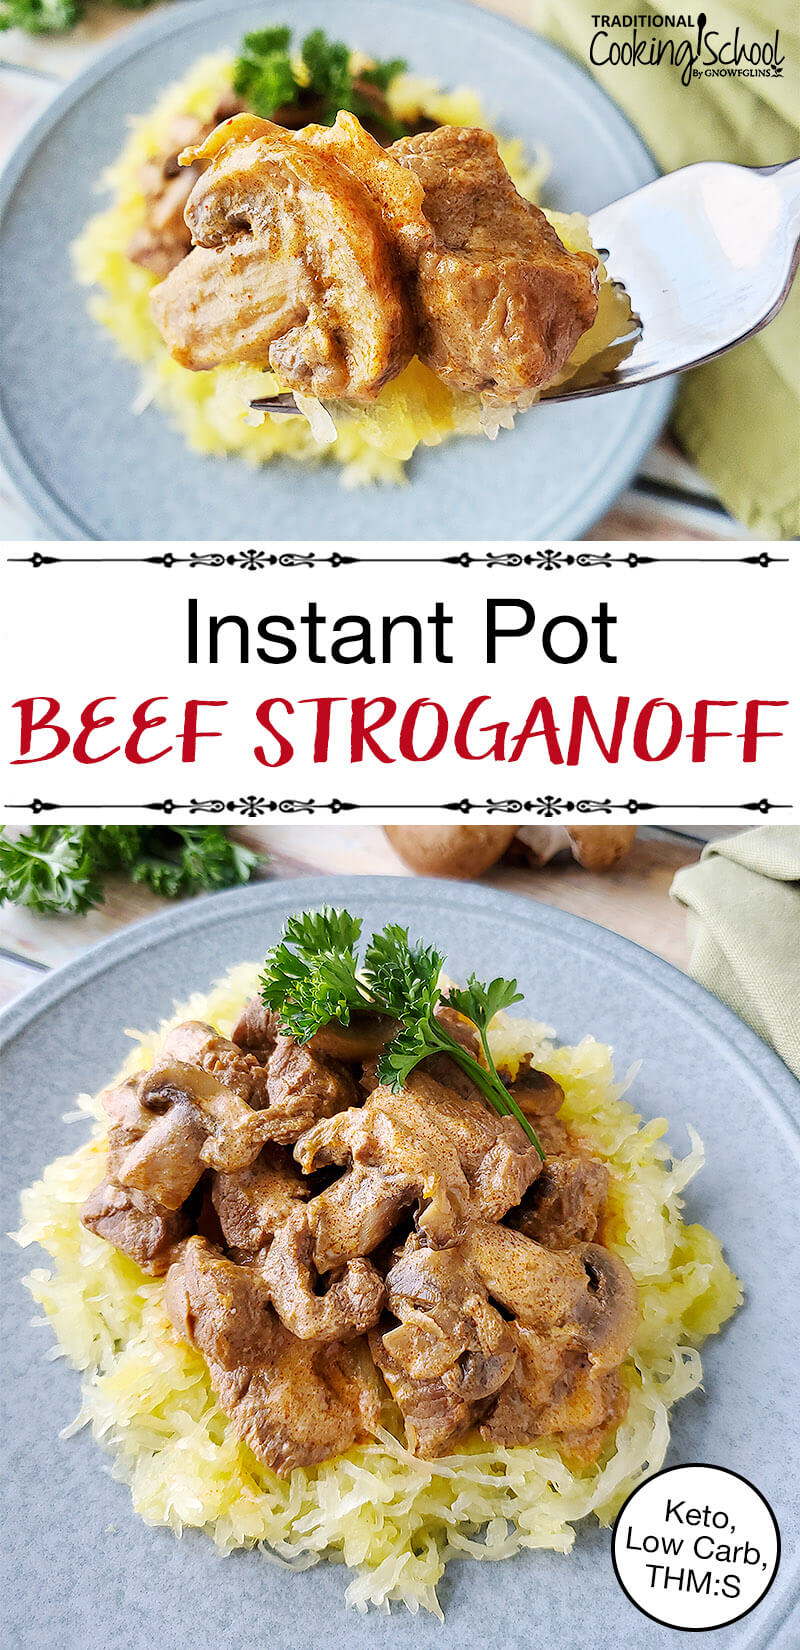 photo collage of beef stroganoff on a bed of spaghetti squash, with a fork holding up a bite so you can see the mushroom and sauce, with a sprig of parsley for garnish, and text overlay: "Instant Pot Beef Stroganoff (Keto, Low Carb, THM:S)"